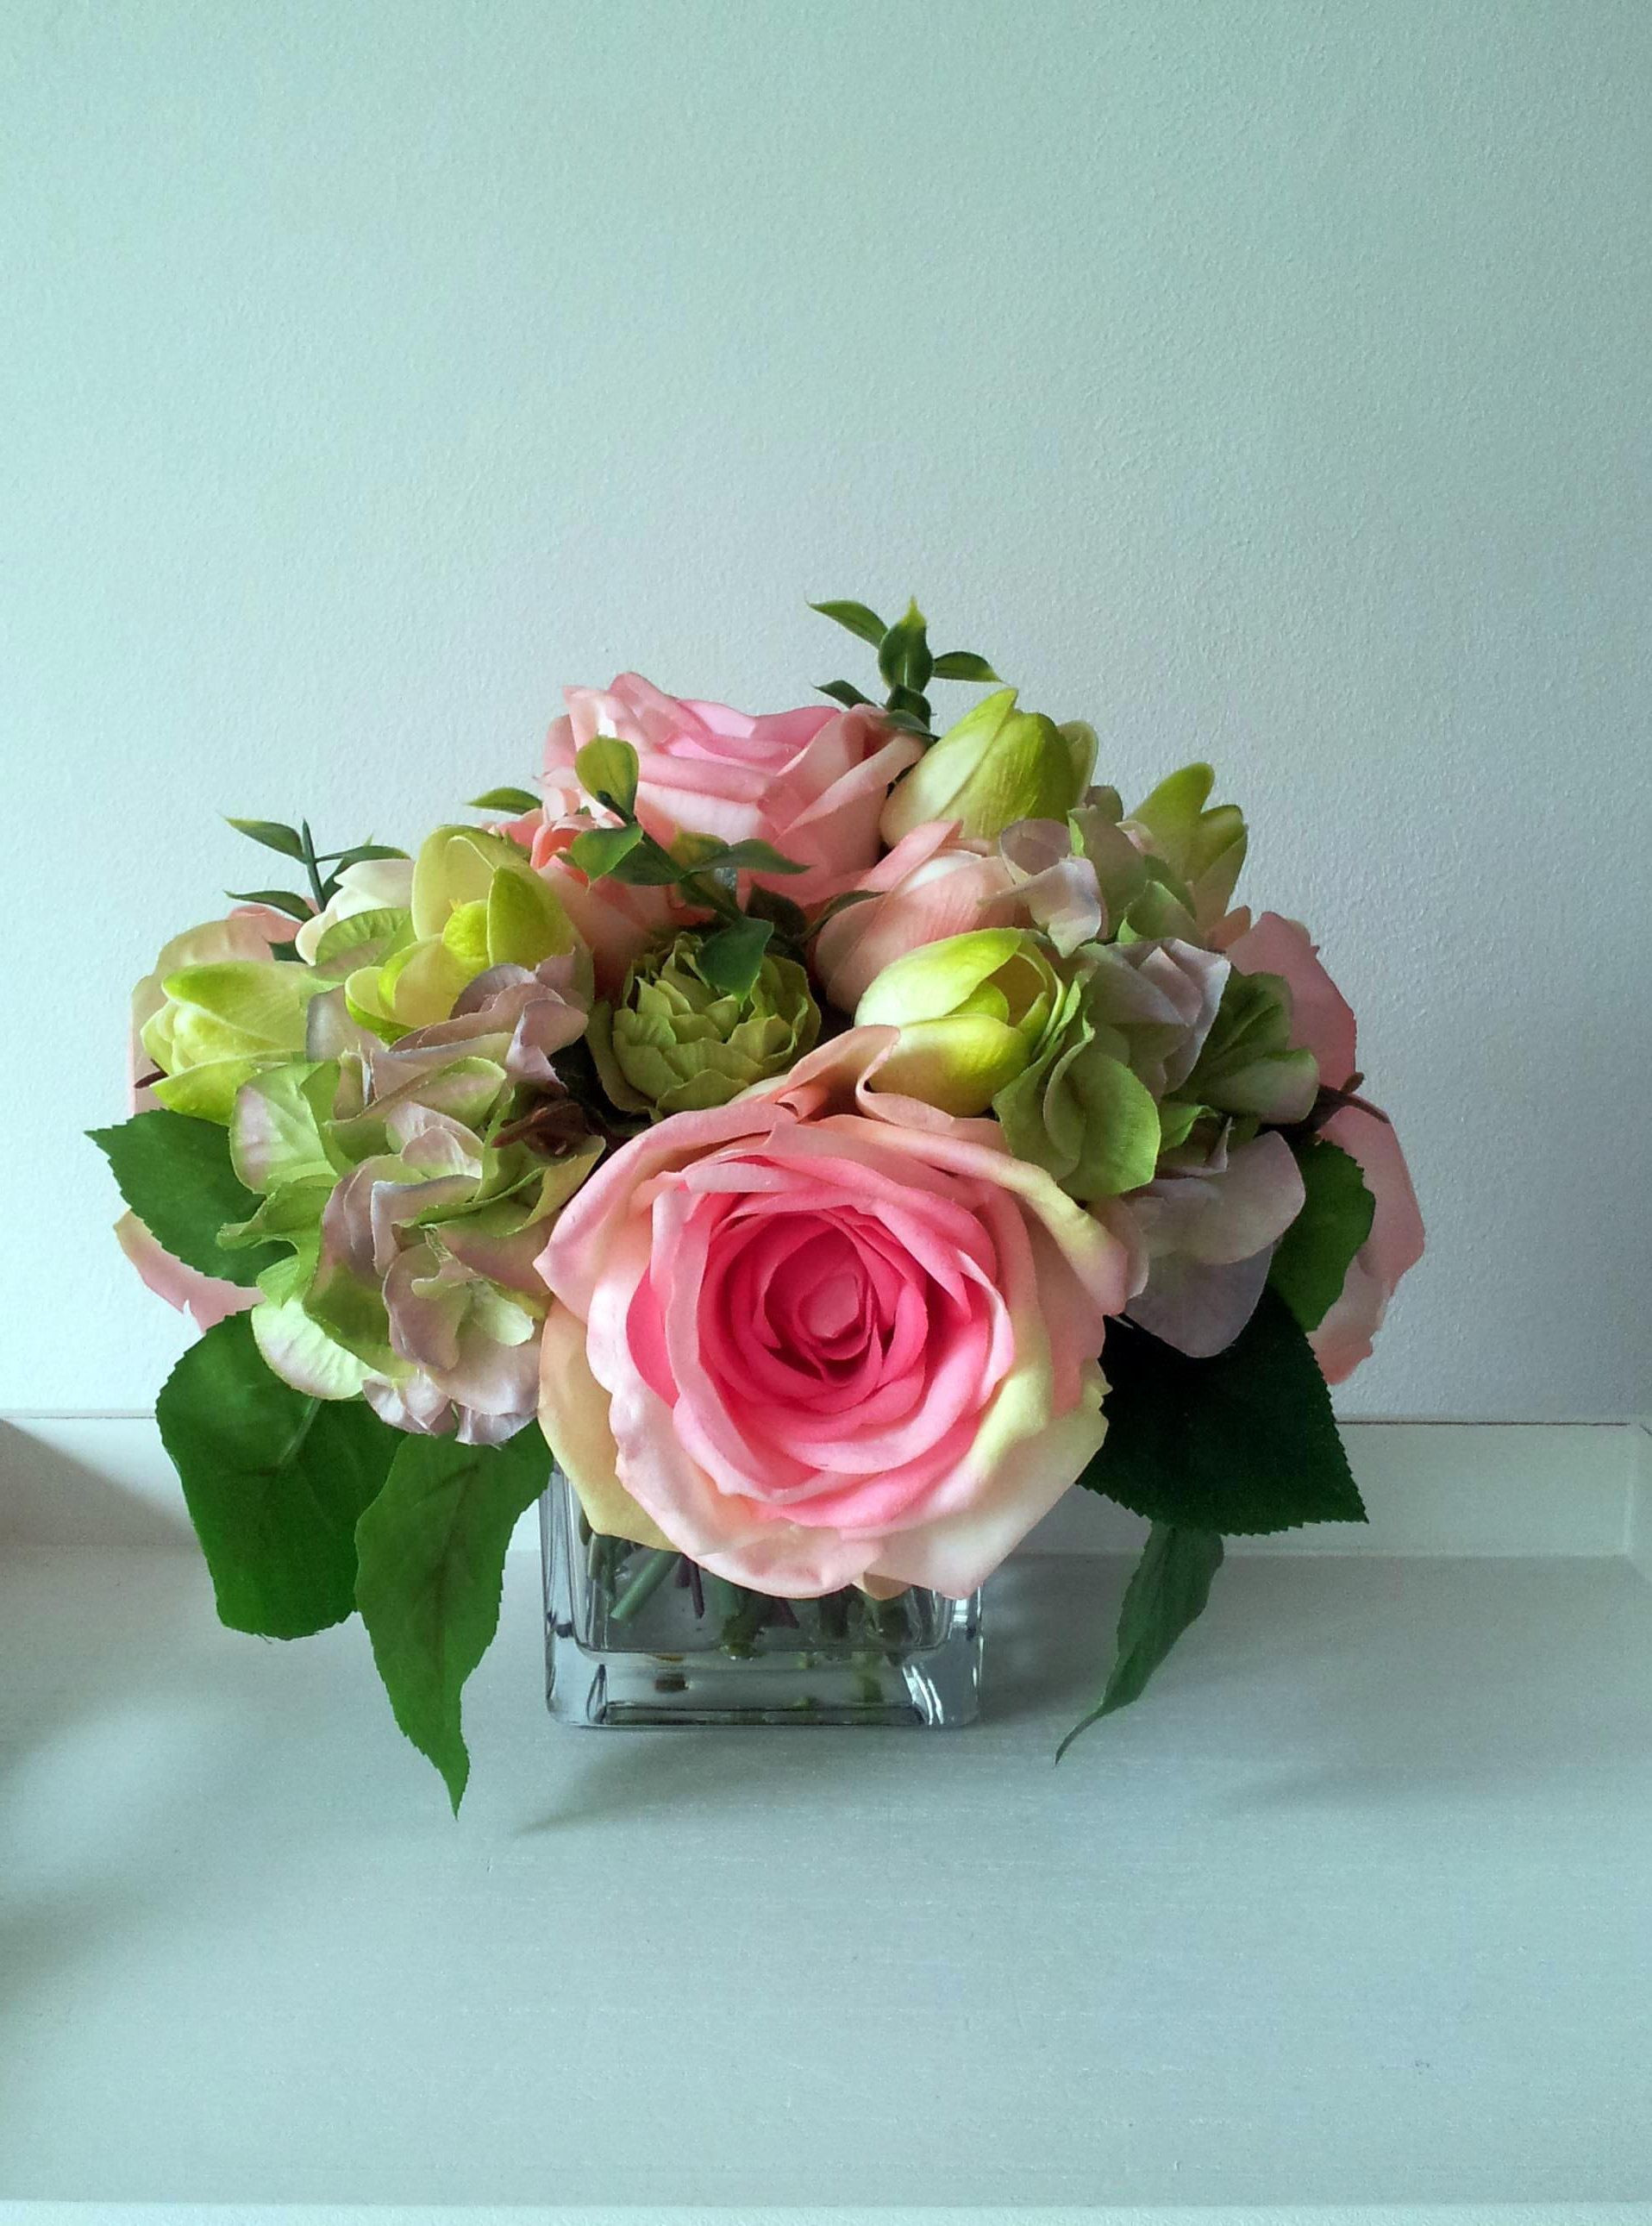 flower vase with artificial flowers online shopping of artificial flowers centrepiece faux silk flowers arrangement faux intended for artificial flowers centrepiece faux silk flowers arrangement faux silk flowers in vase home decor pink decor pink centrepiece gift by tessflowersdecor on